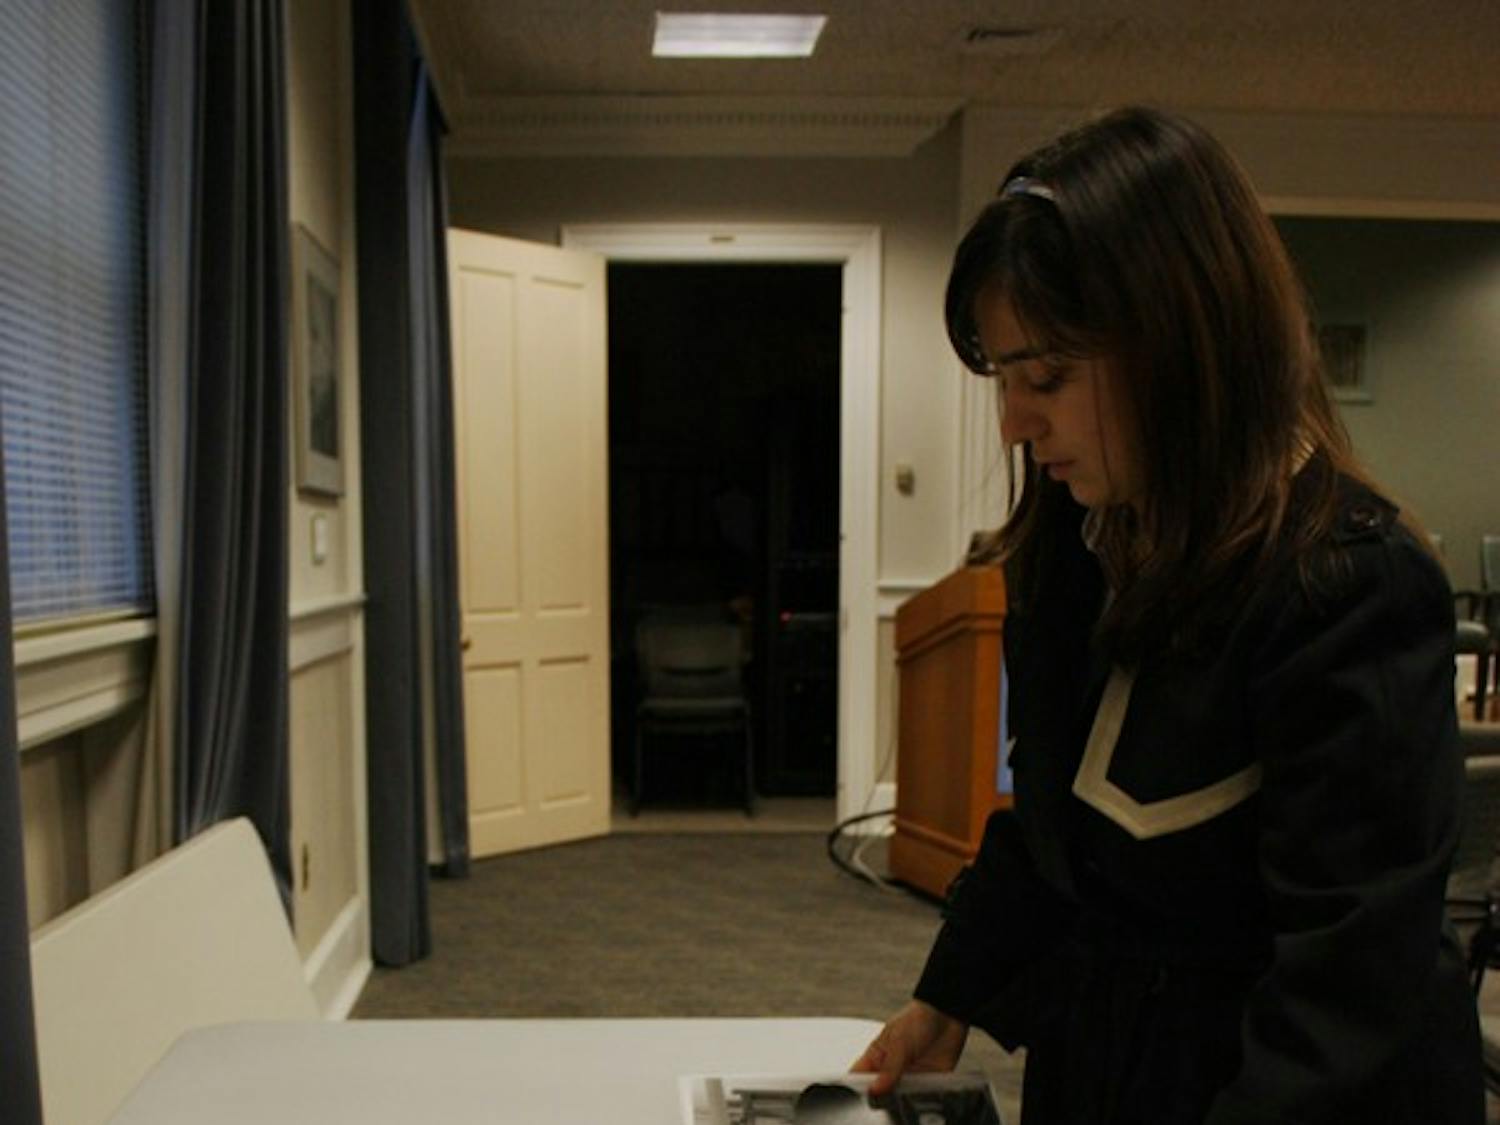 Lisa Garland, a senior sociology major, sets up her  display at the “We H(art) UNC” exhibition in Wilson Library. DTH/Daixi Xu